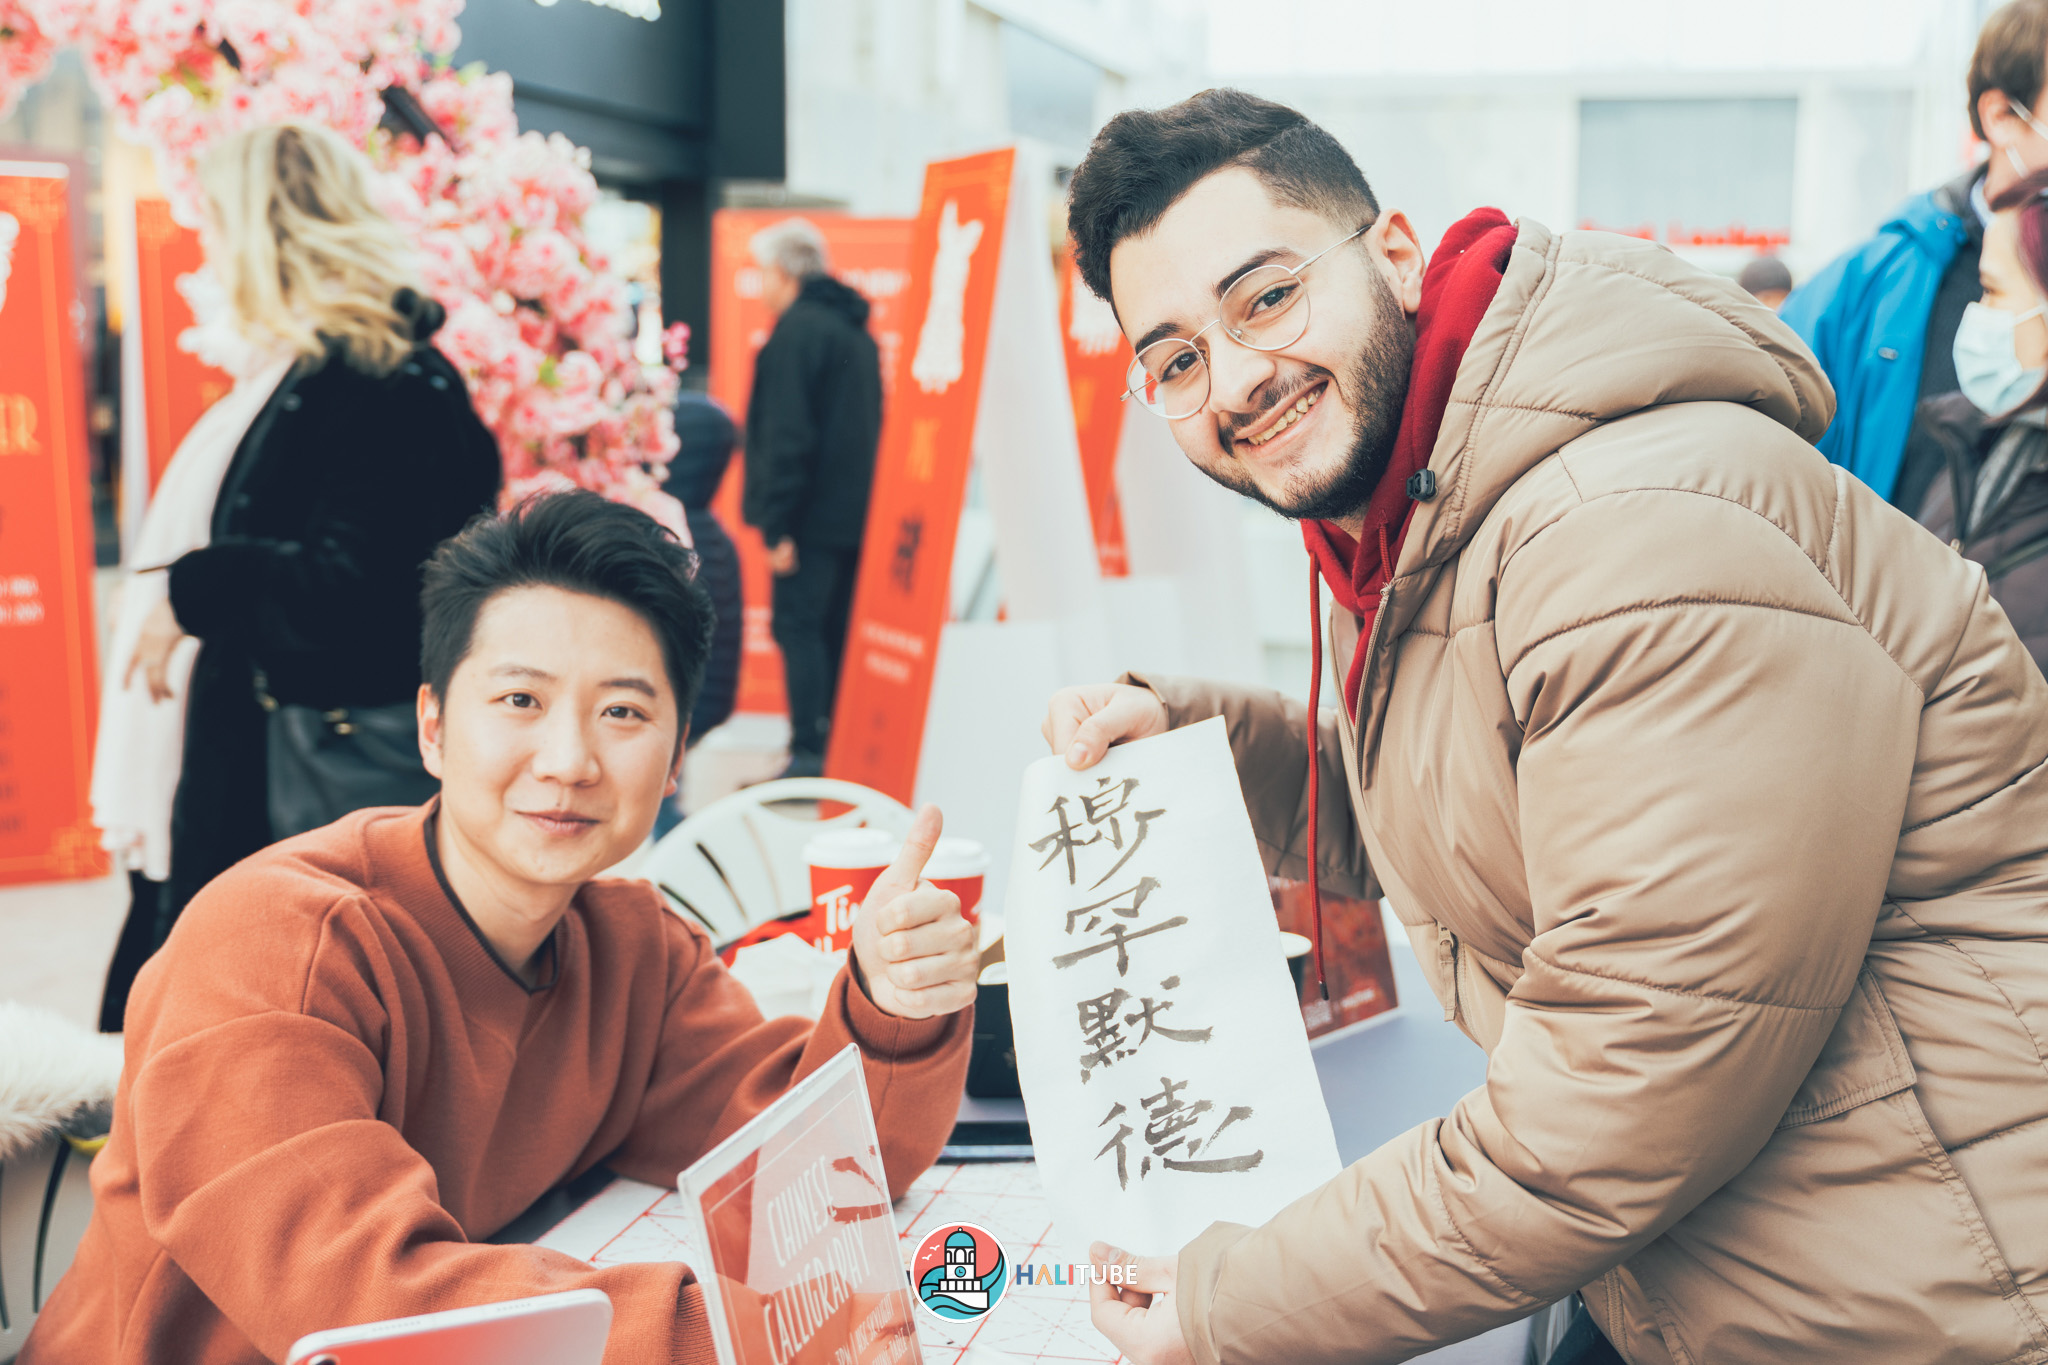 Will writes calligraphy to raise money for Feed Nova Scotia during Lunar New Year festival at the Halifax Shopping Centre.